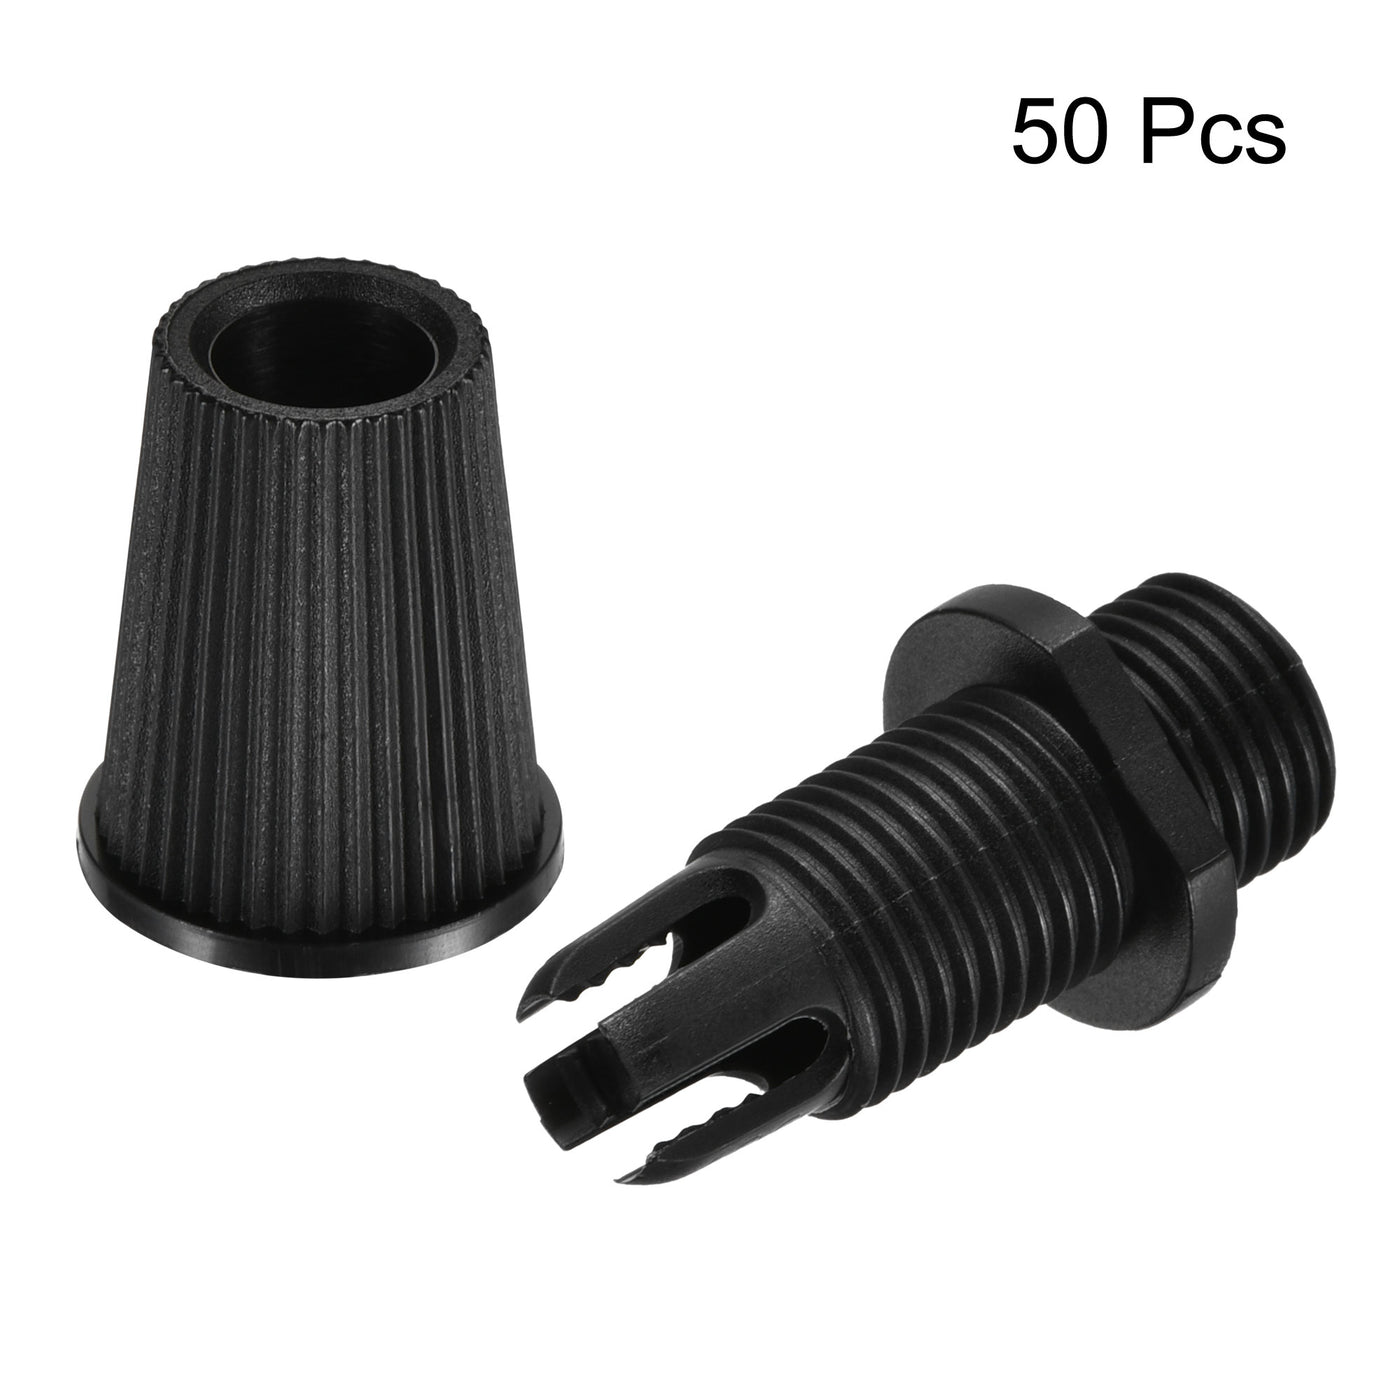 uxcell Uxcell Cable Glands Strain Relief Cord Grips Plastic Black 50Pcs for Wiring Hanging Light Ceiling Pendant Lamp